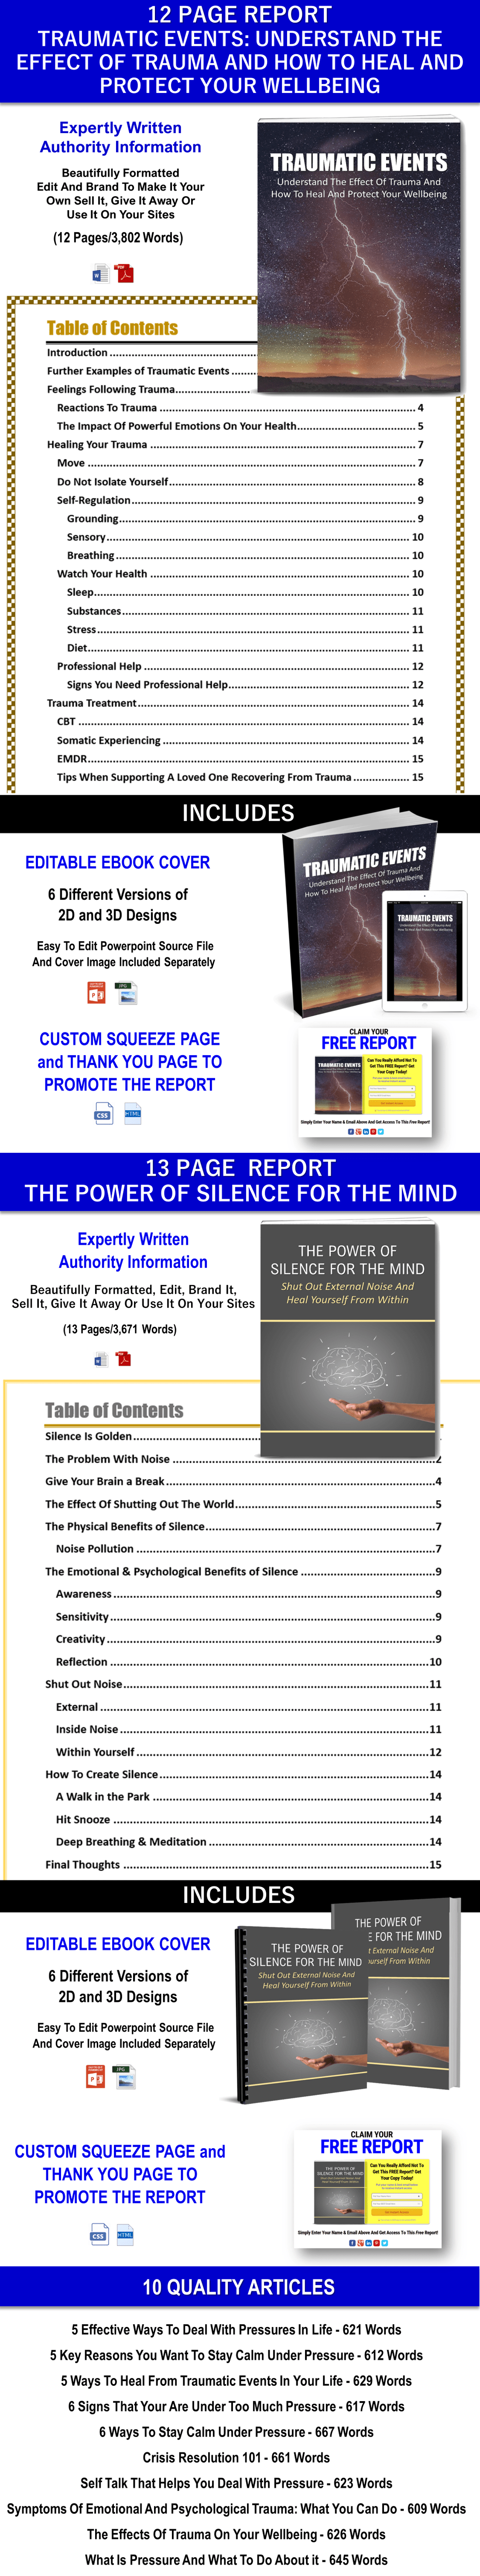 trauma and silence for mind PLR Private Label Rights